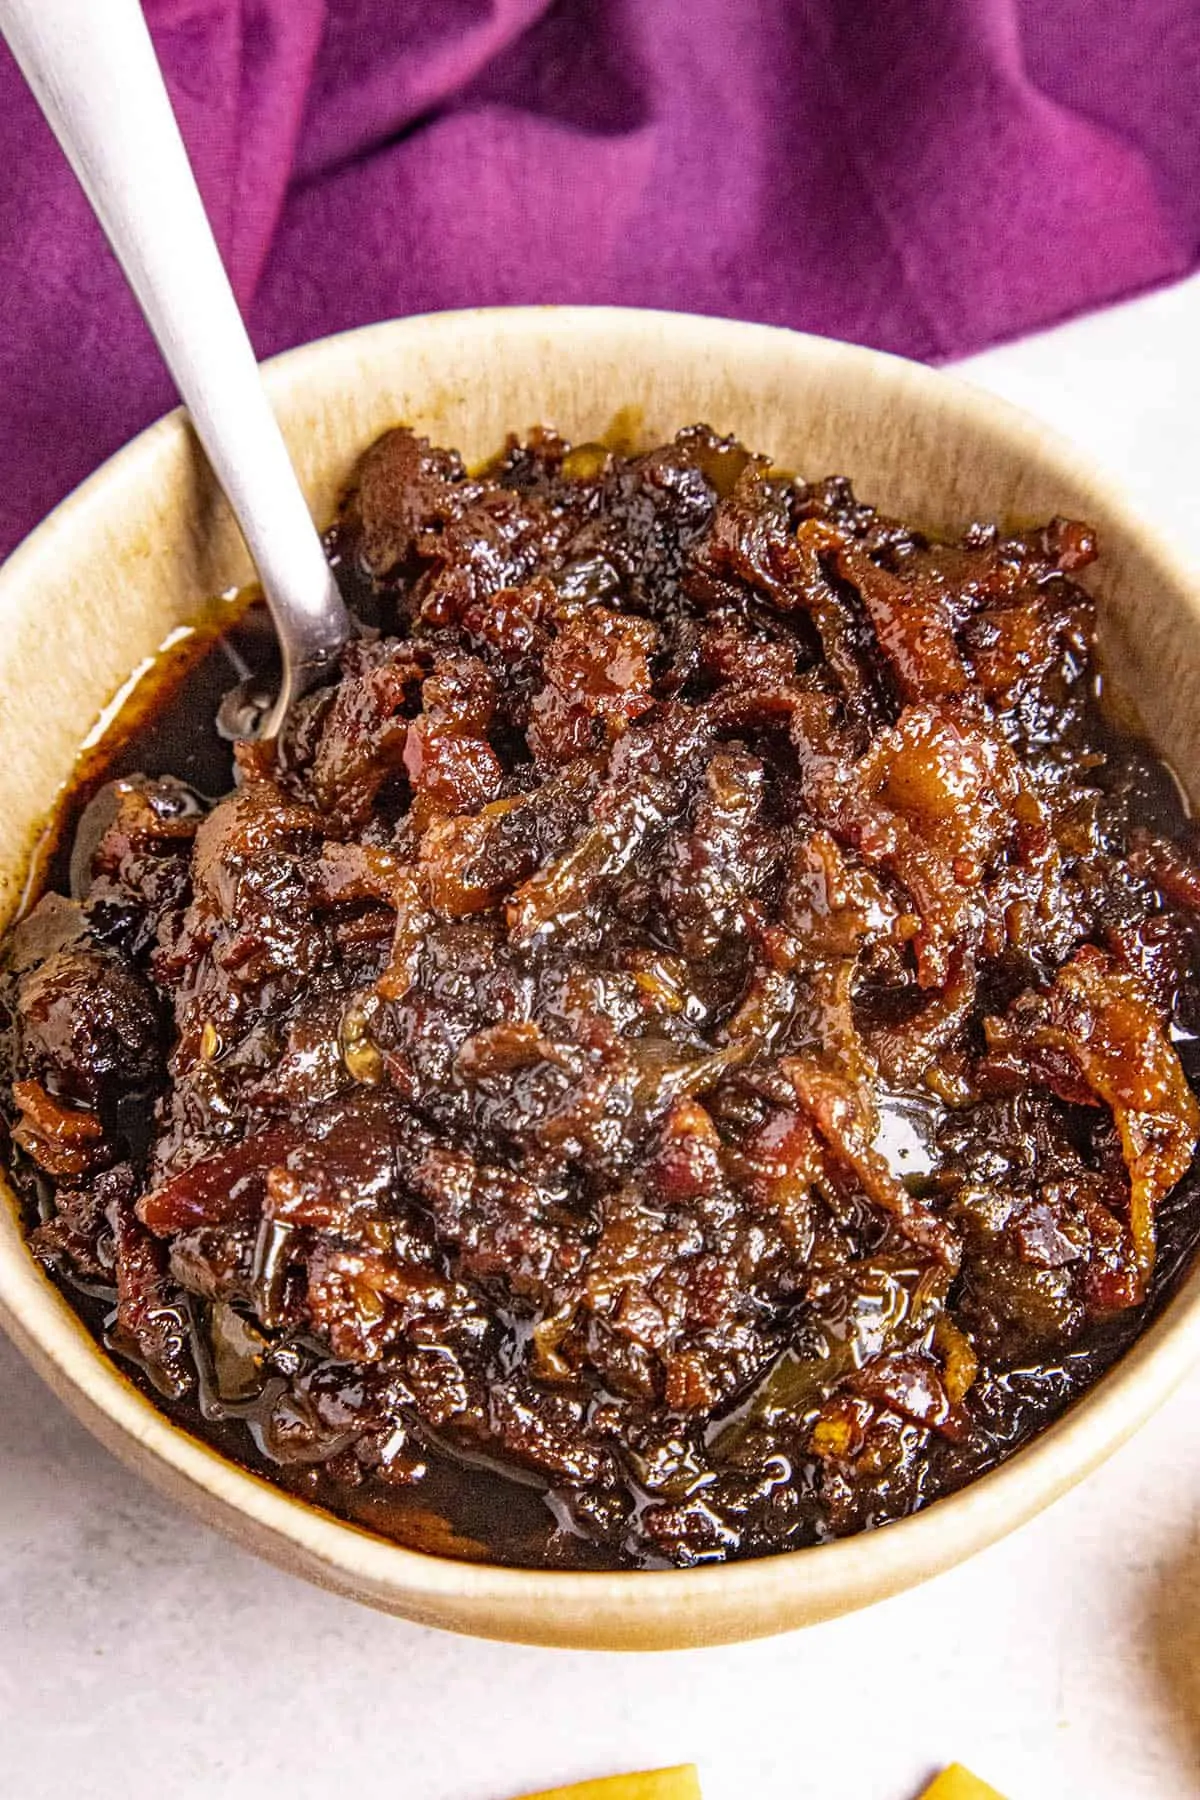 Bacon Jam in a bowl, ready to enjoy.